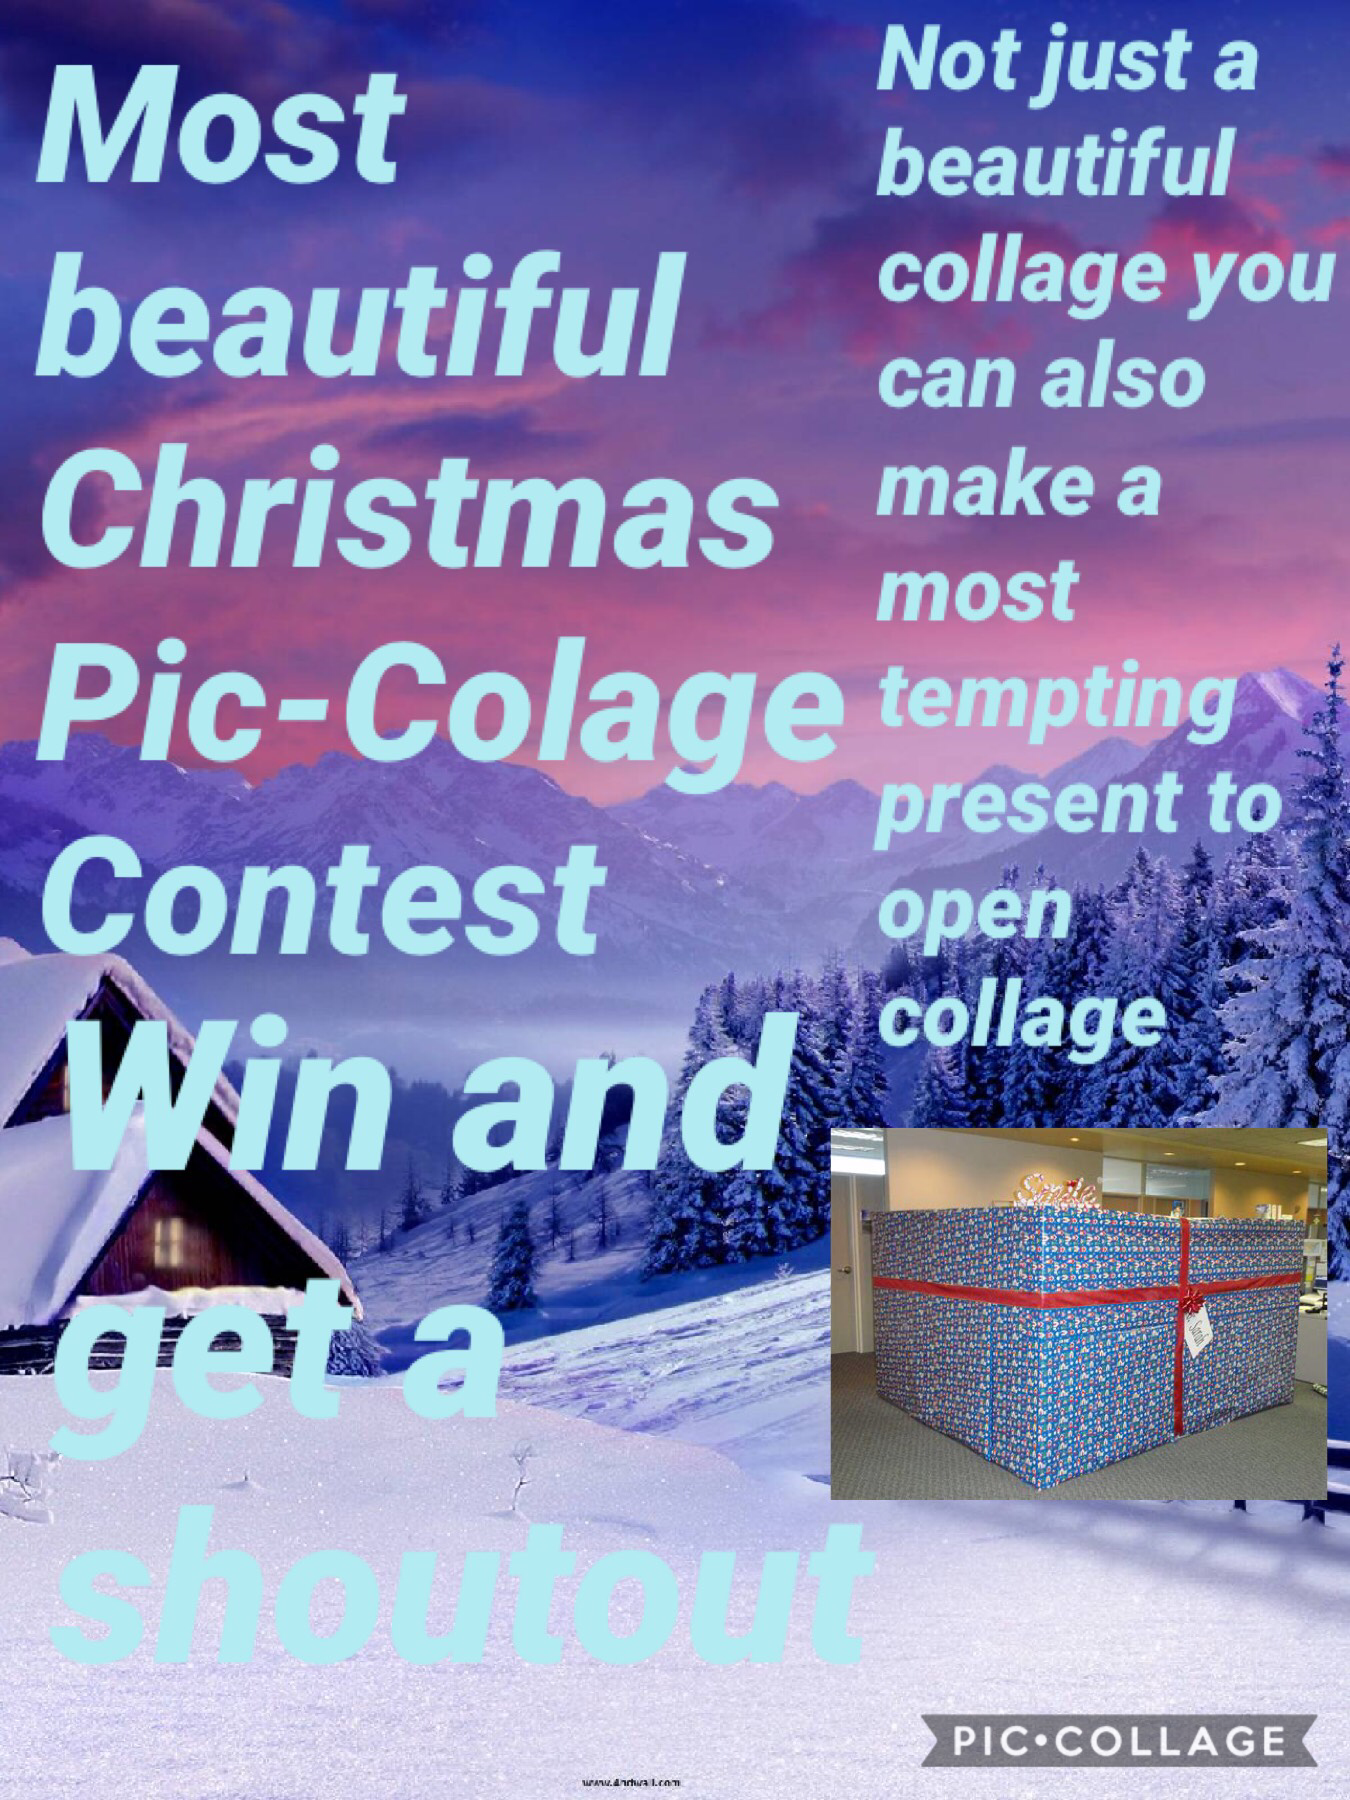                       Tap here pls
Contest first contest remix this collage